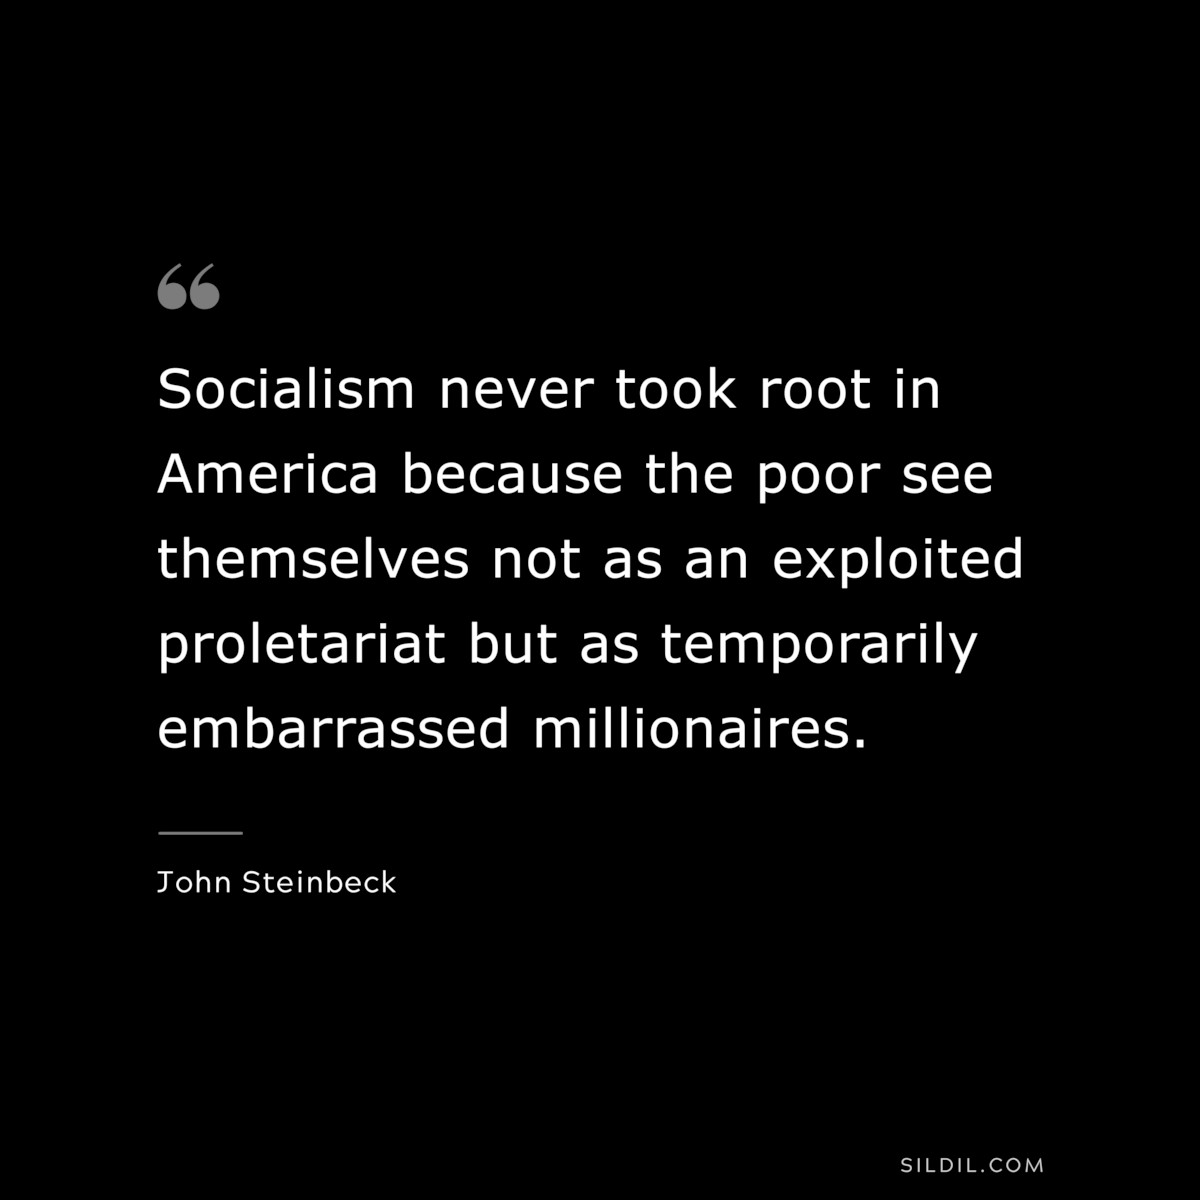 Socialism never took root in America because the poor see themselves not as an exploited proletariat but as temporarily embarrassed millionaires.― John Steinbeck